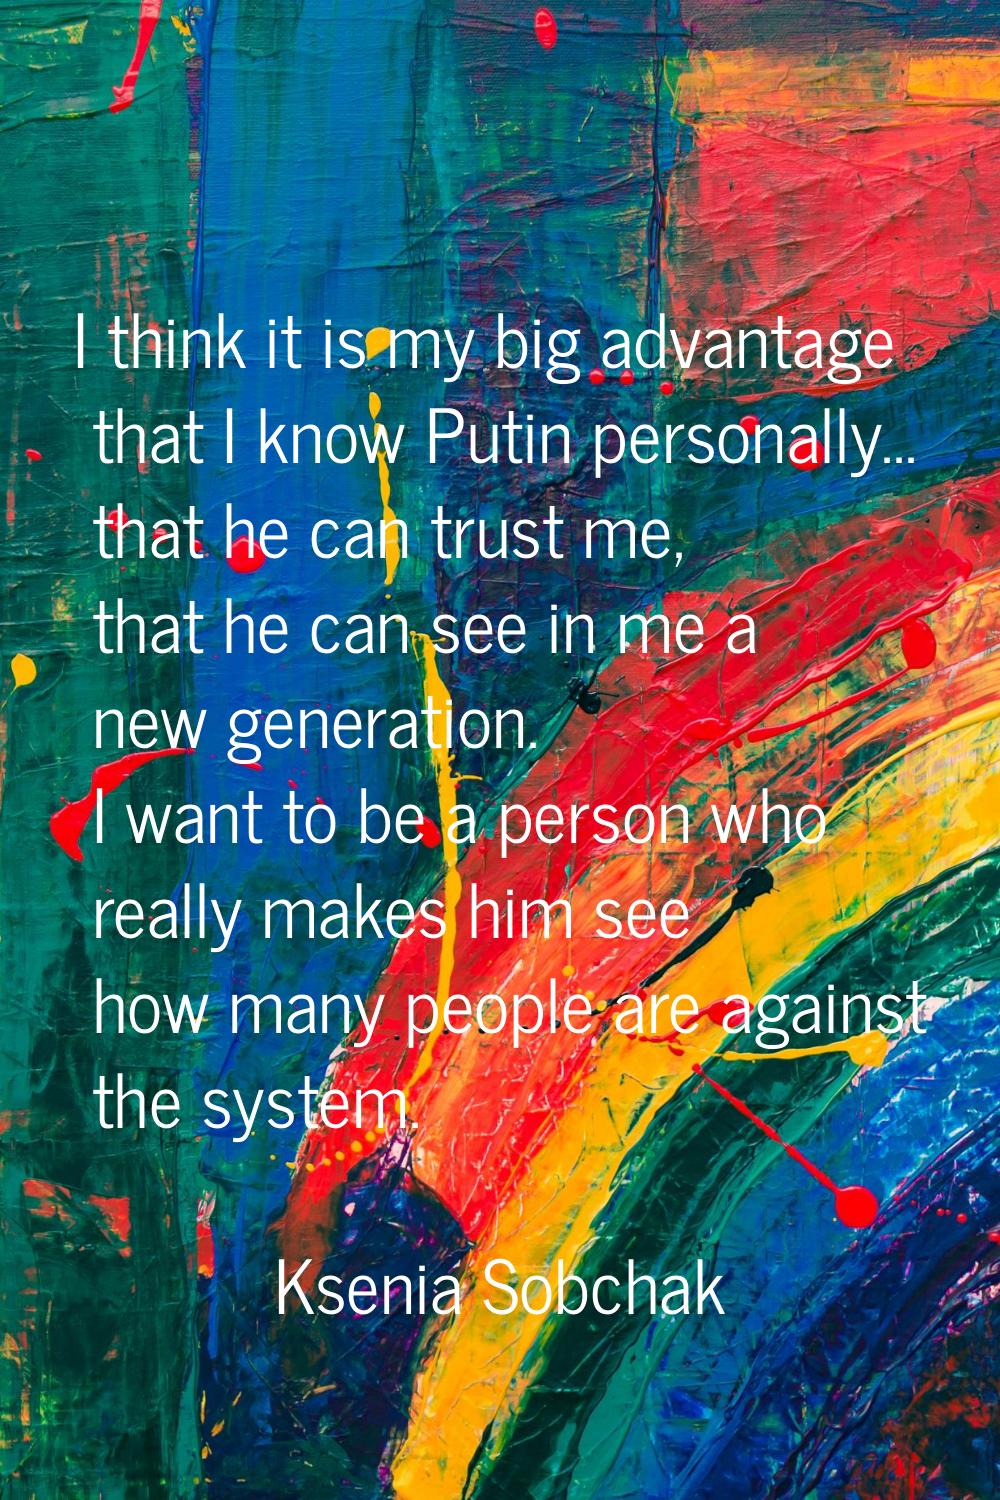 I think it is my big advantage that I know Putin personally... that he can trust me, that he can se